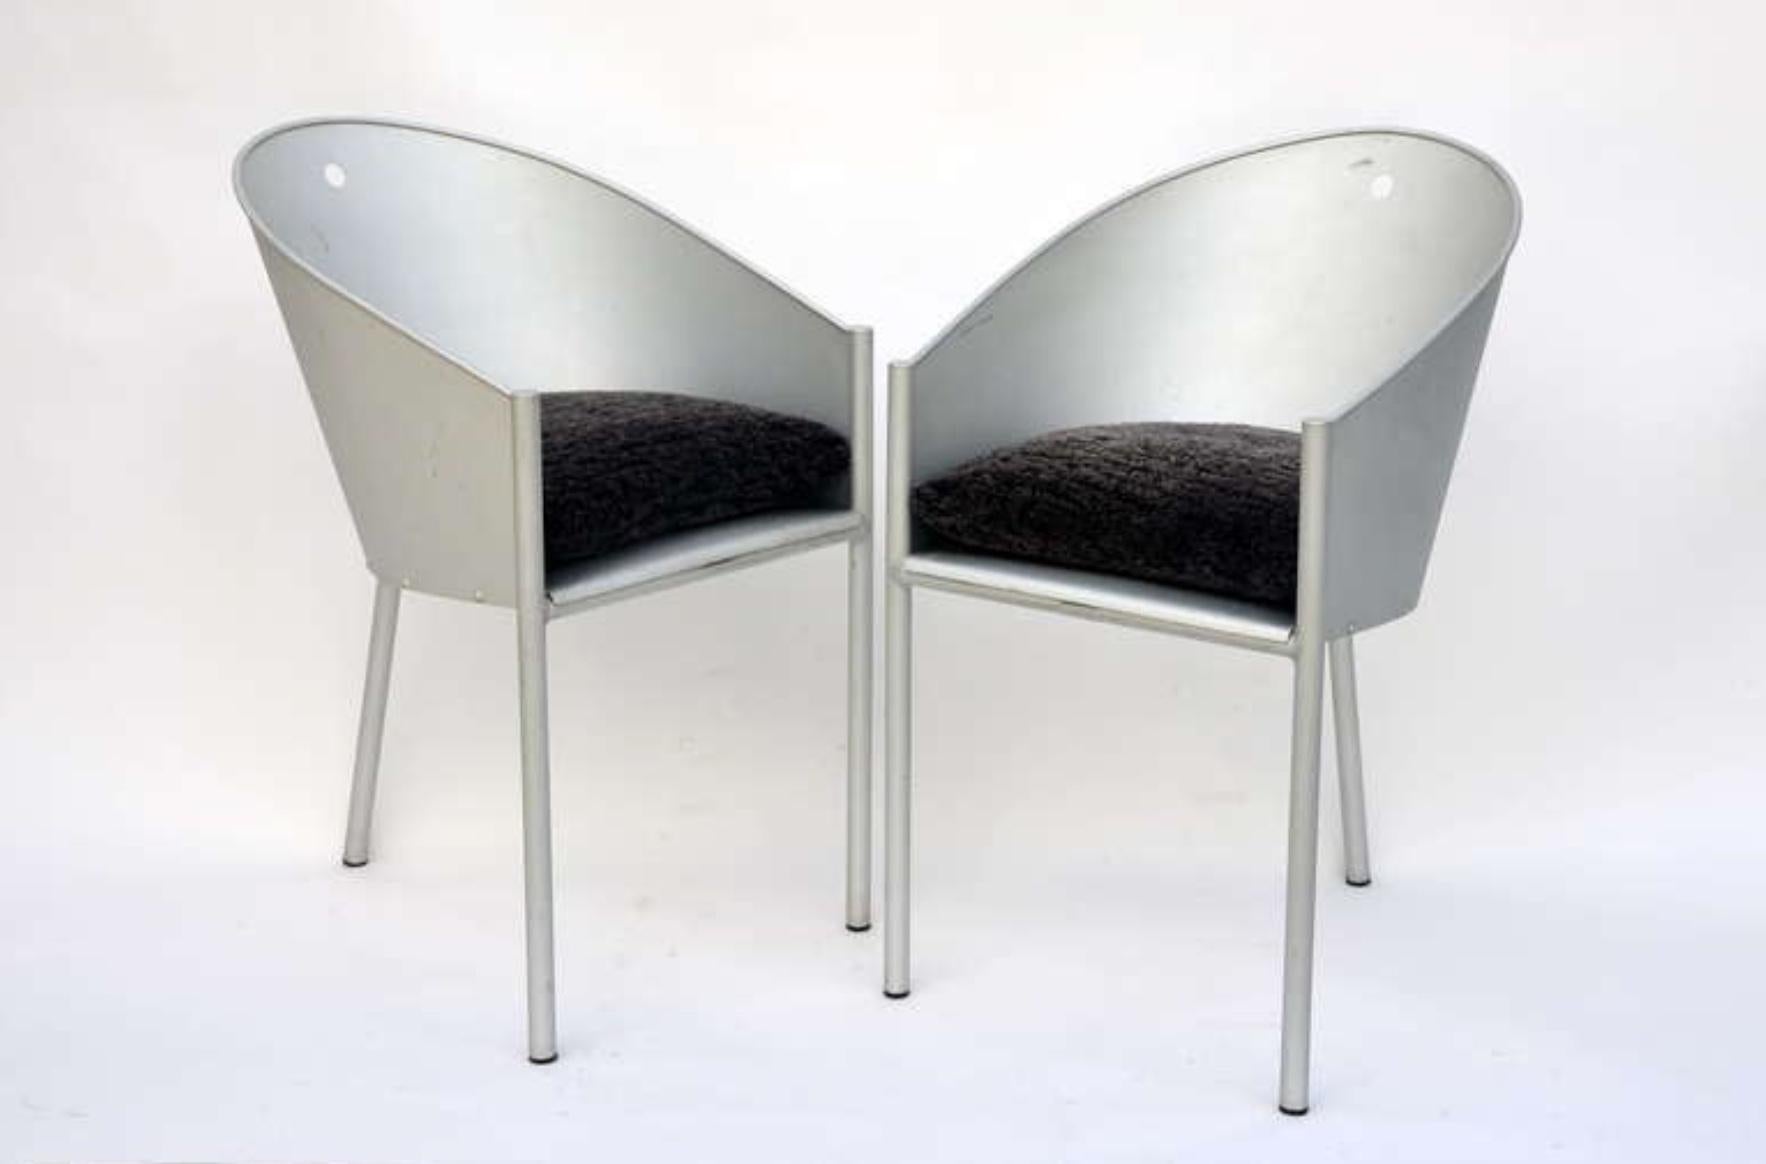 Pair of sculptural chairs by Philippe Starck. New wool-upholstered seat cushions.